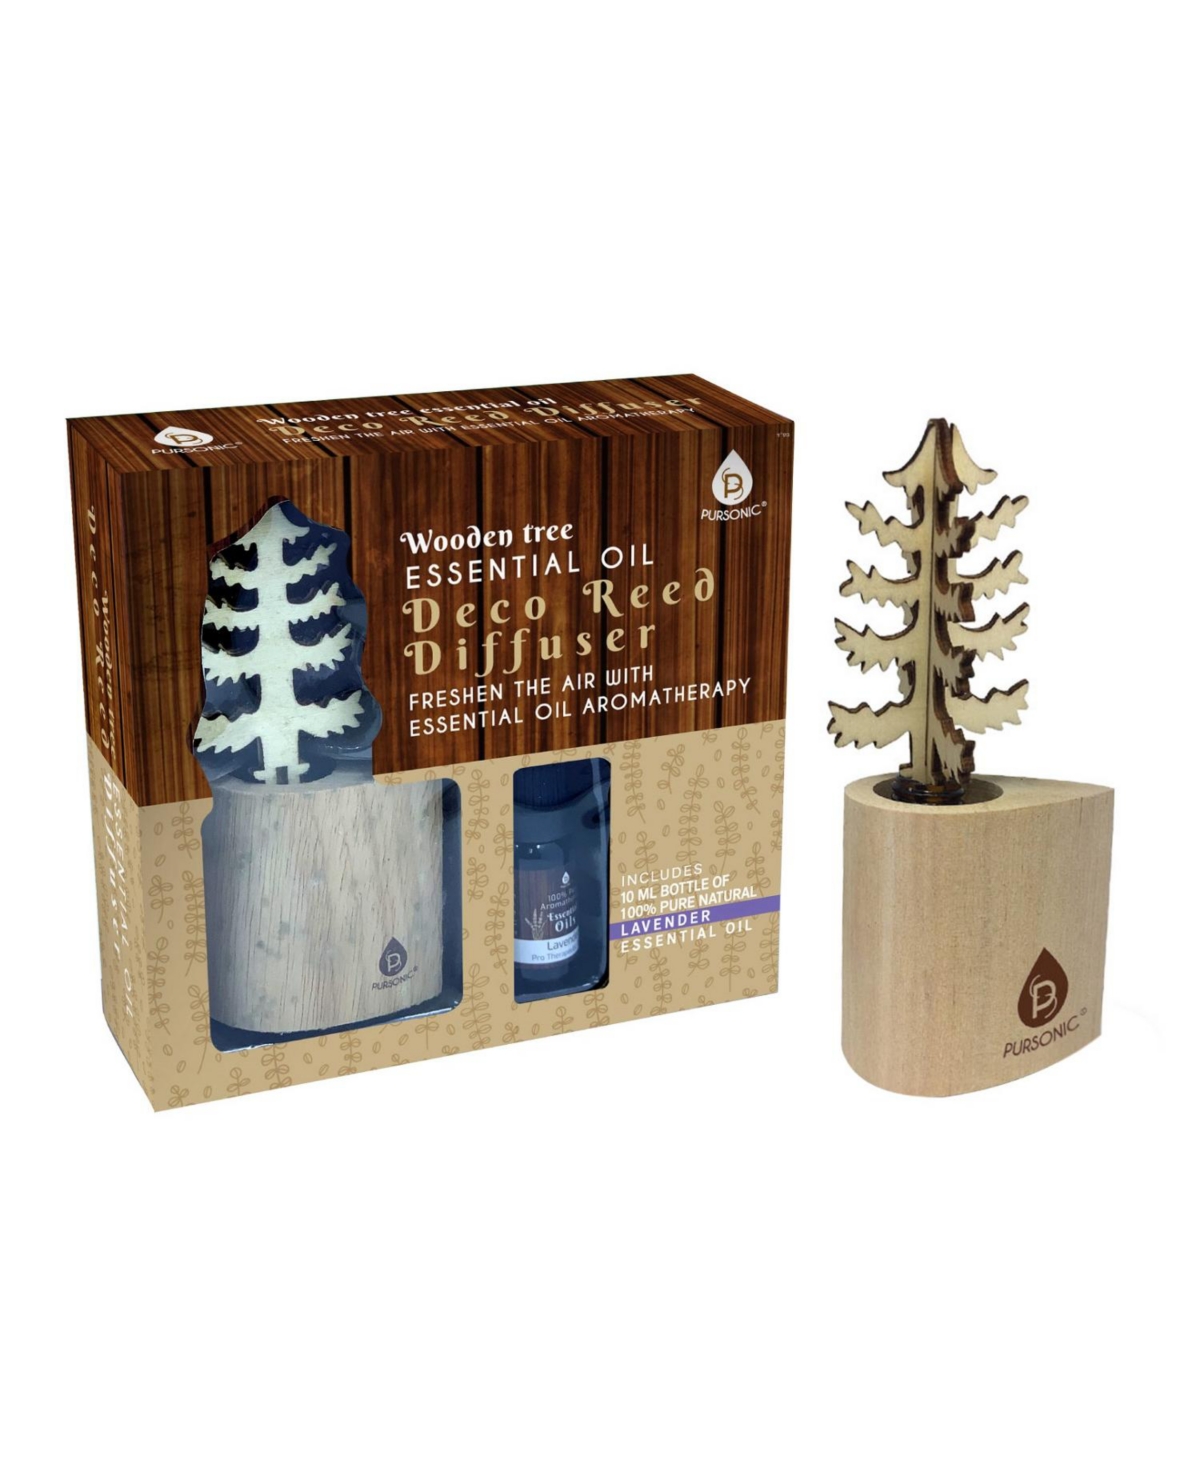 3D Wooden Standard Tree Reed Diffuser with Lavender Essential Oil - Natural